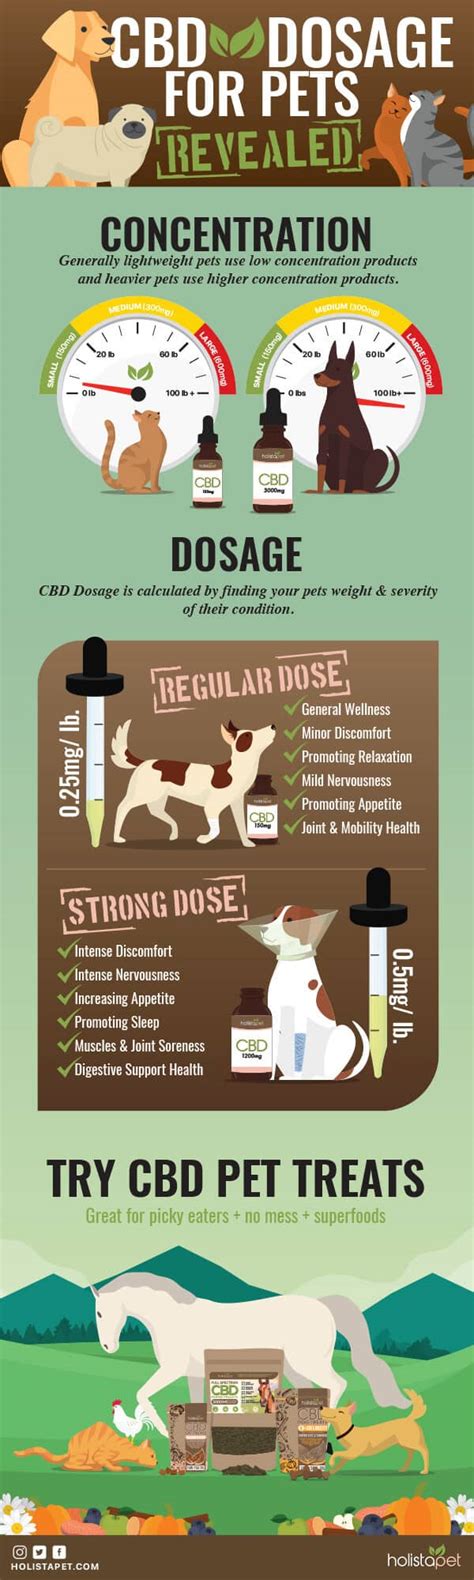  Our veterinary professionals are always happy to work with you to determine the best CBD care regimen for your animal— contact us anytime